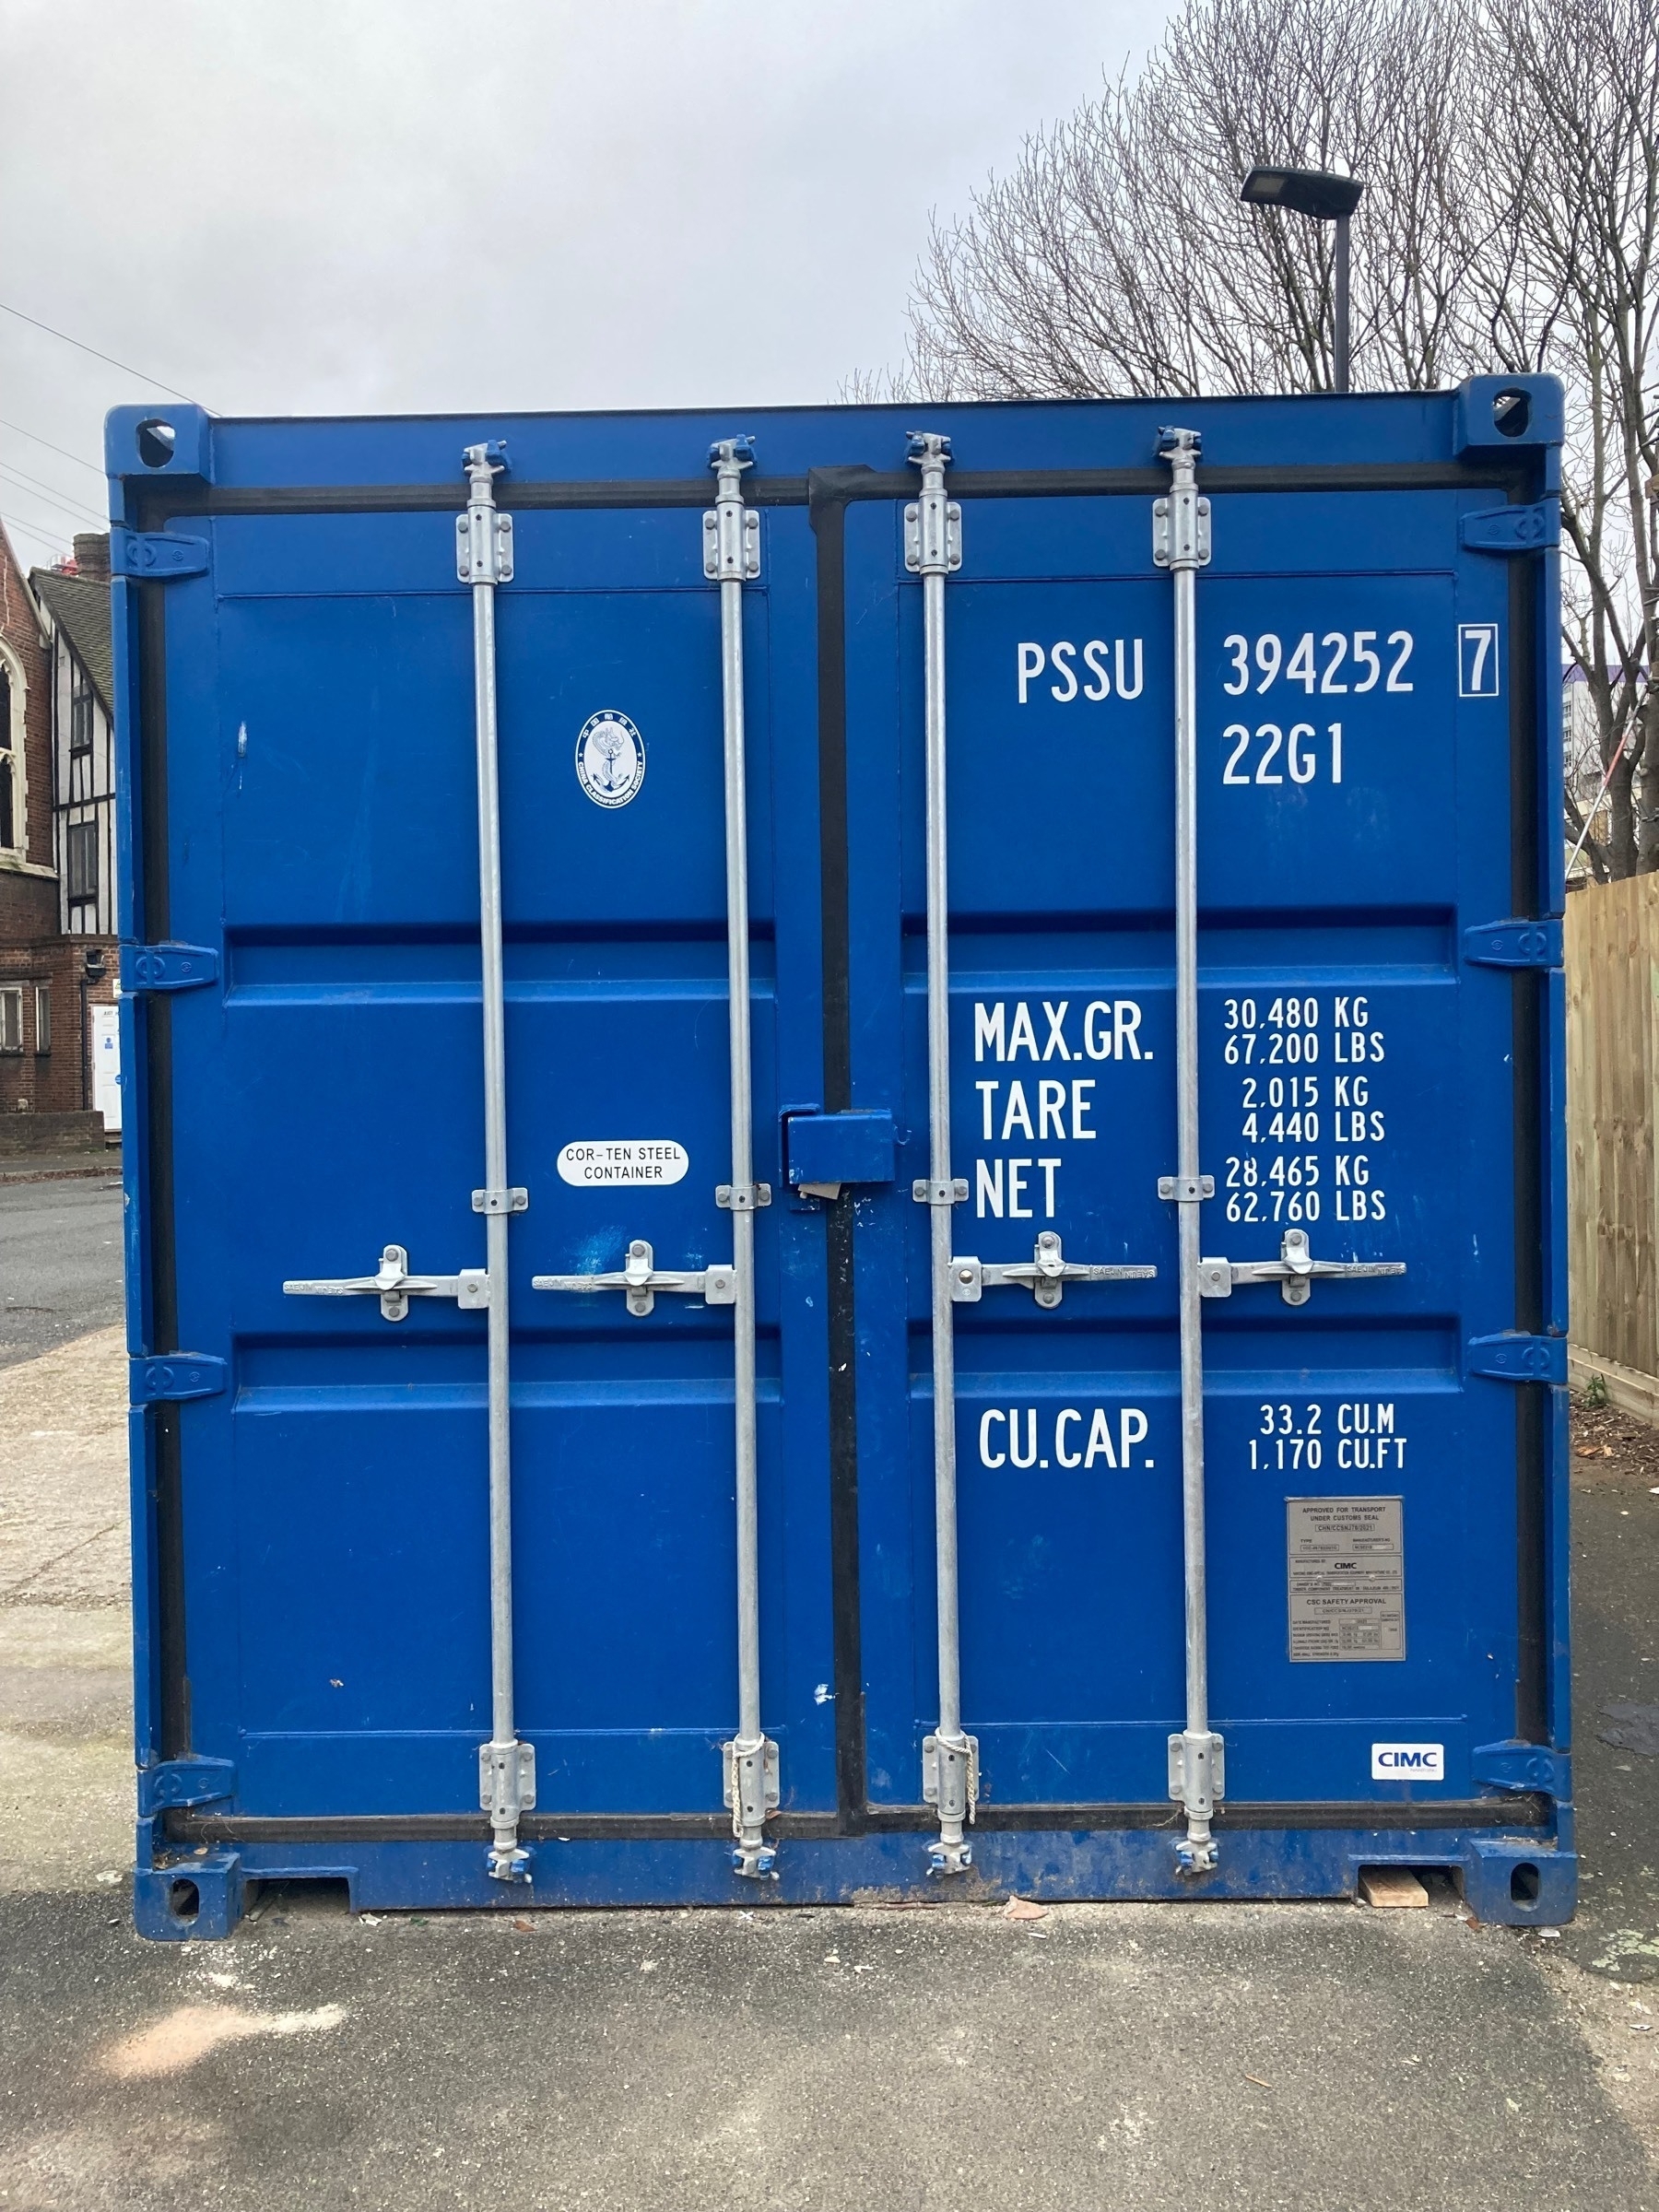 Picture of a blue shipping container holding builders materials and tools at a regeneration site in Canning Town, East London, UK